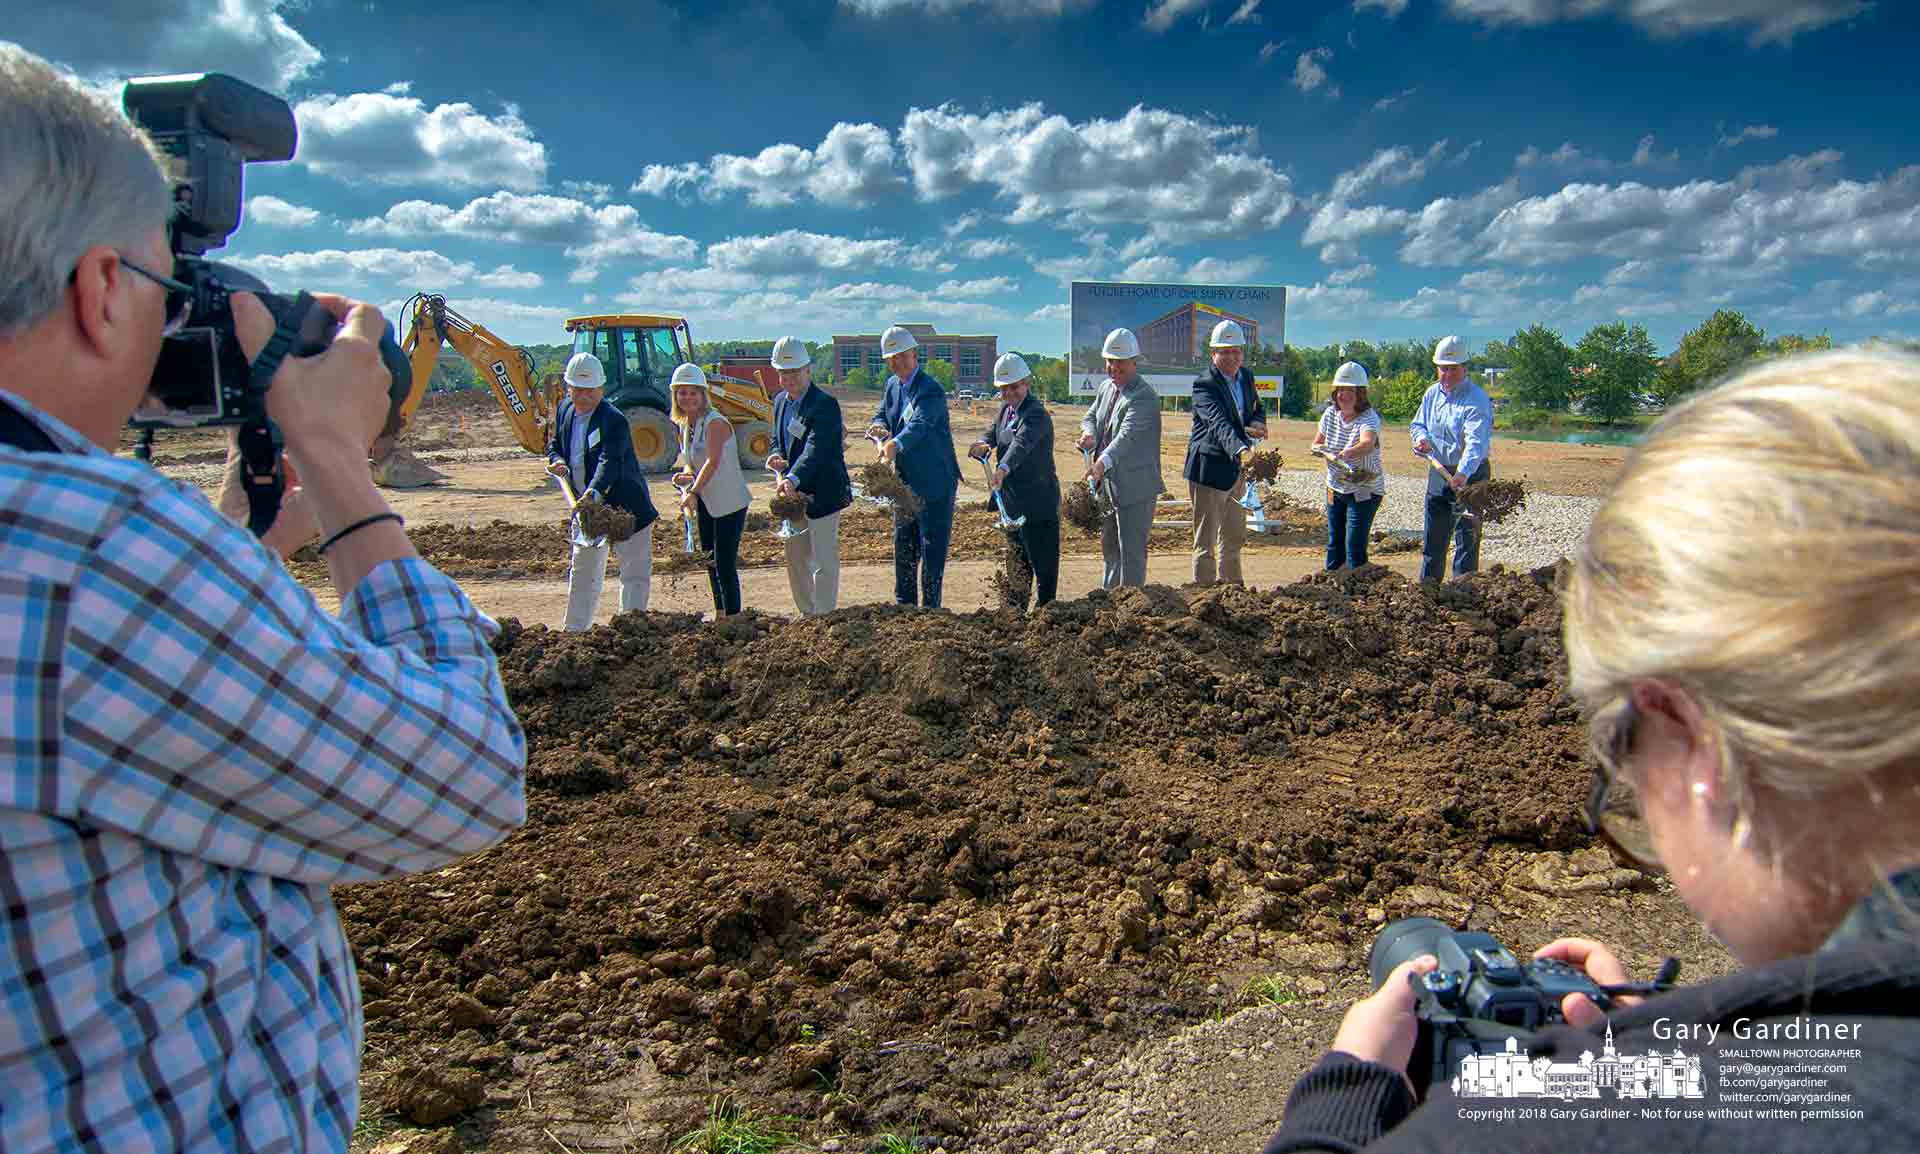 A pair of photographers record the ceremonial groundbreaking for the new DHL Supply Chain headquarters by company executives and the city of Westerville. My Final Photo for Sept. 14, 2018.